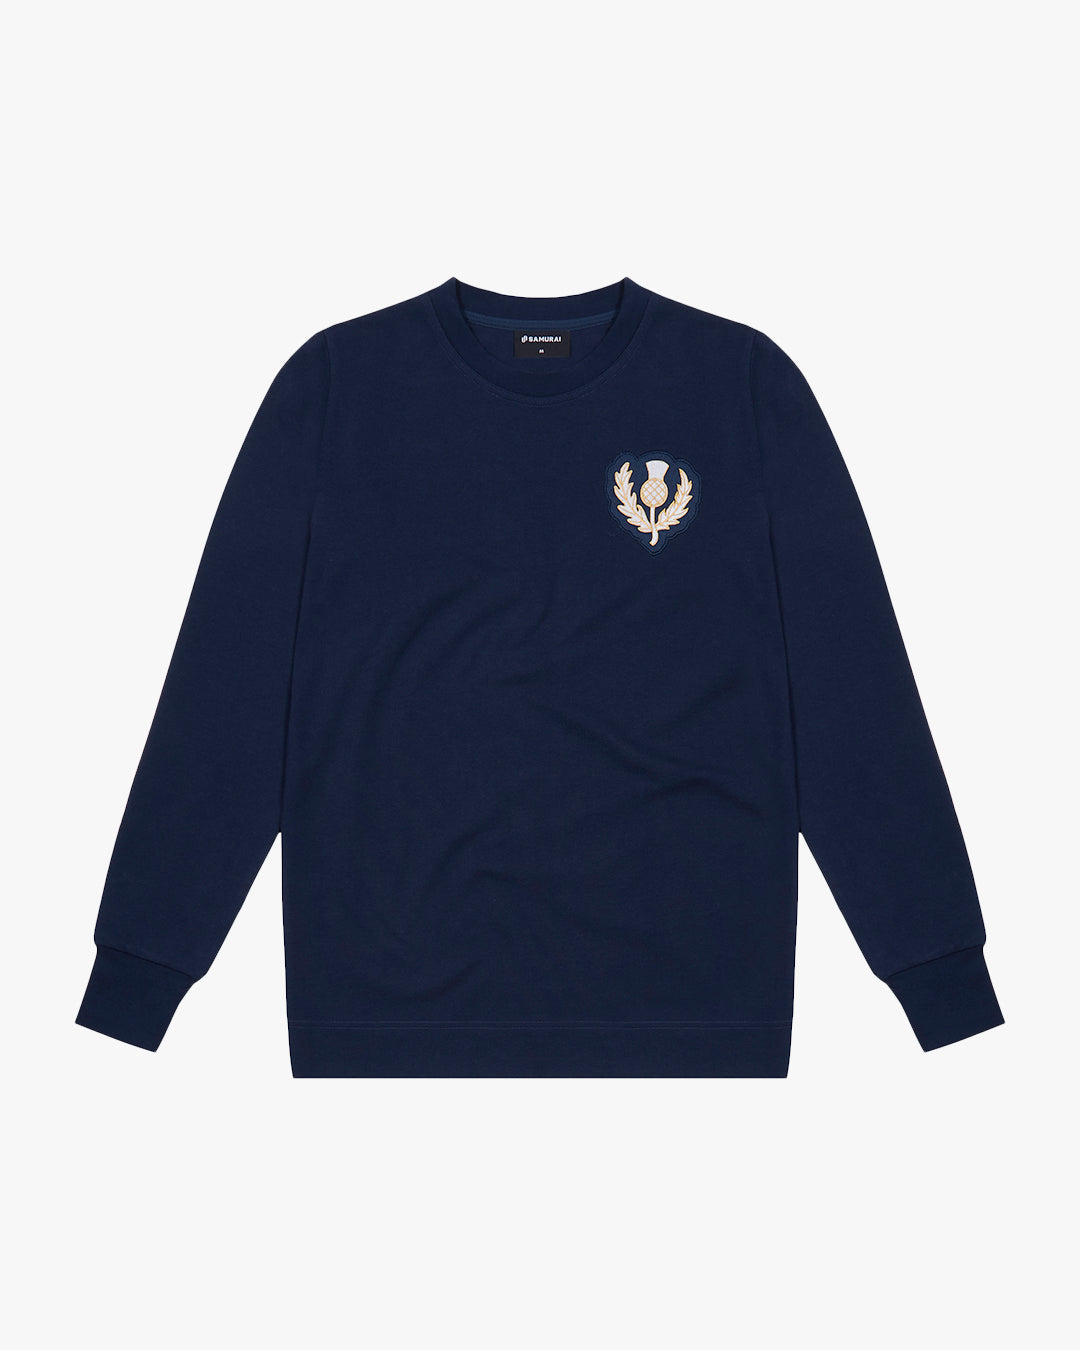 SAMURAI | Rugby Apparel Built from 27 Years of Heritage